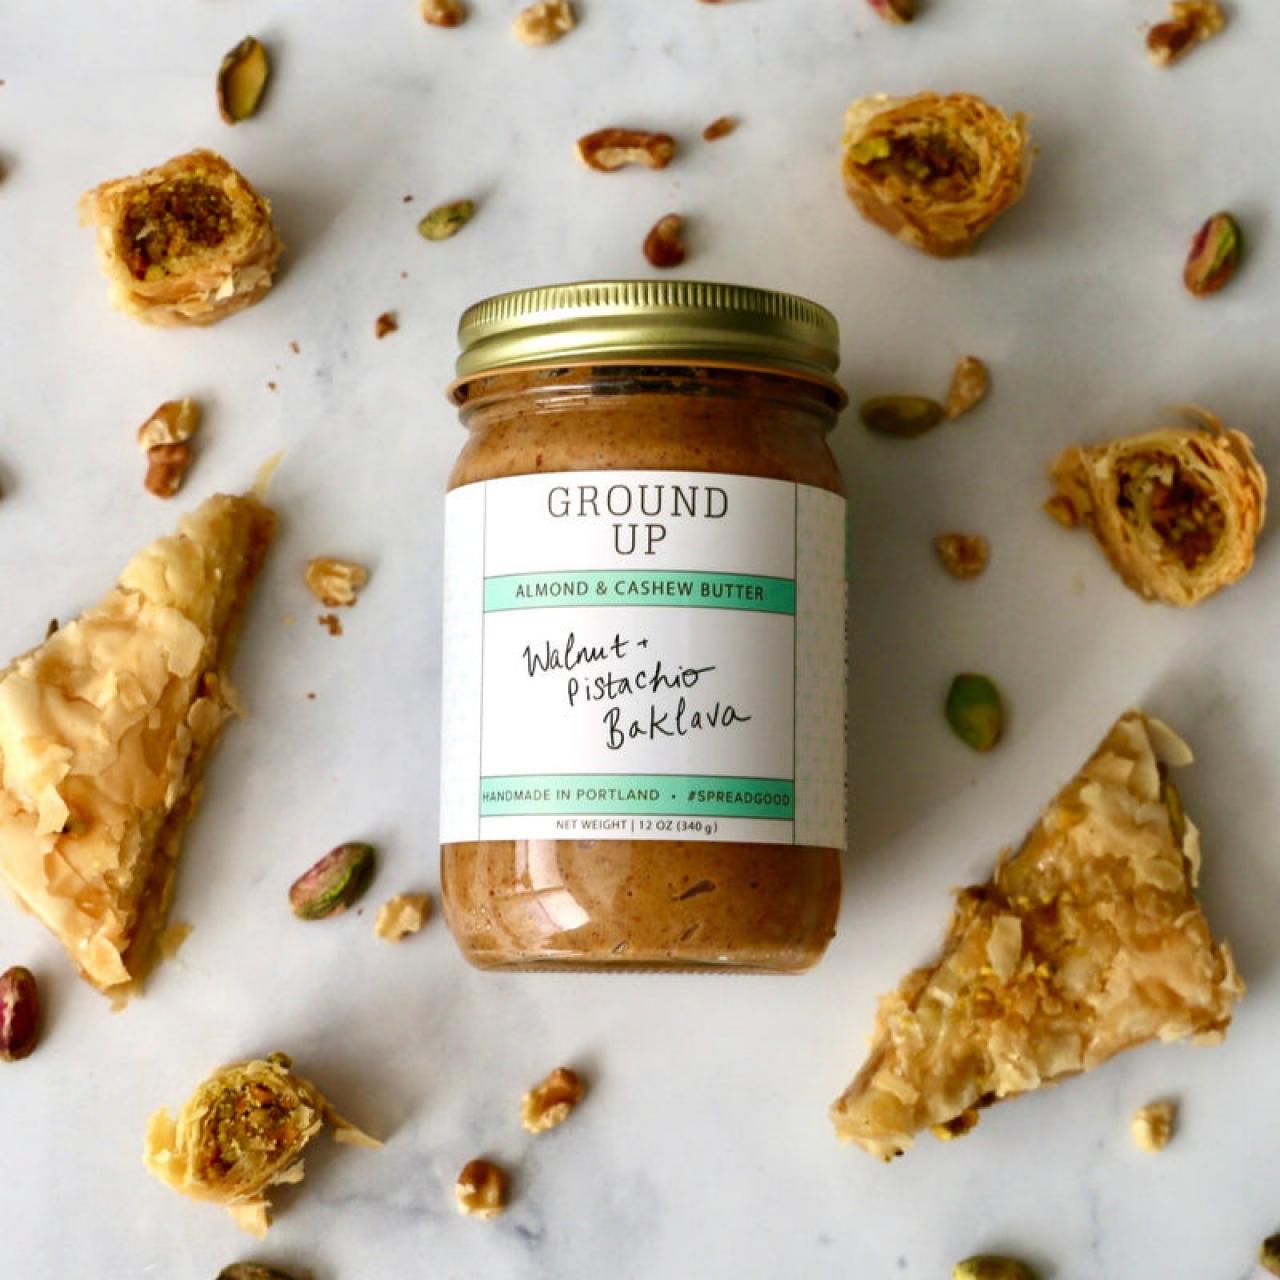 Almond Butter White - Nut butters - (Mixed) nut butter